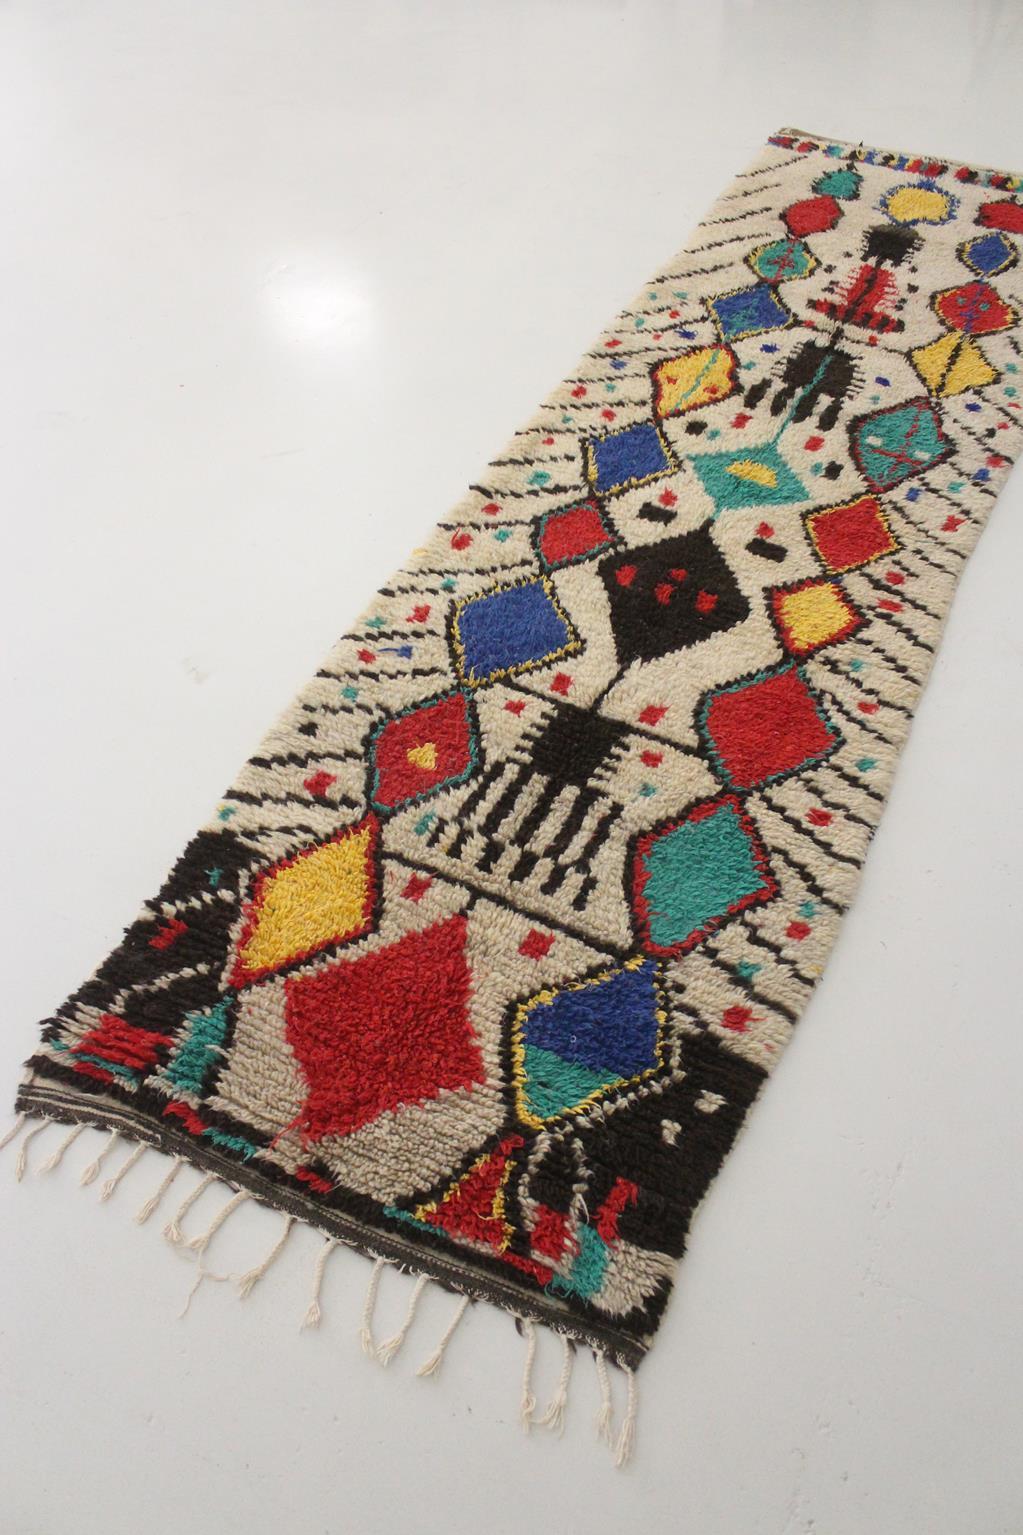 20th Century Vintage Moroccan Azilal runner rug - 3.1x11.3feet / 95x345cm For Sale